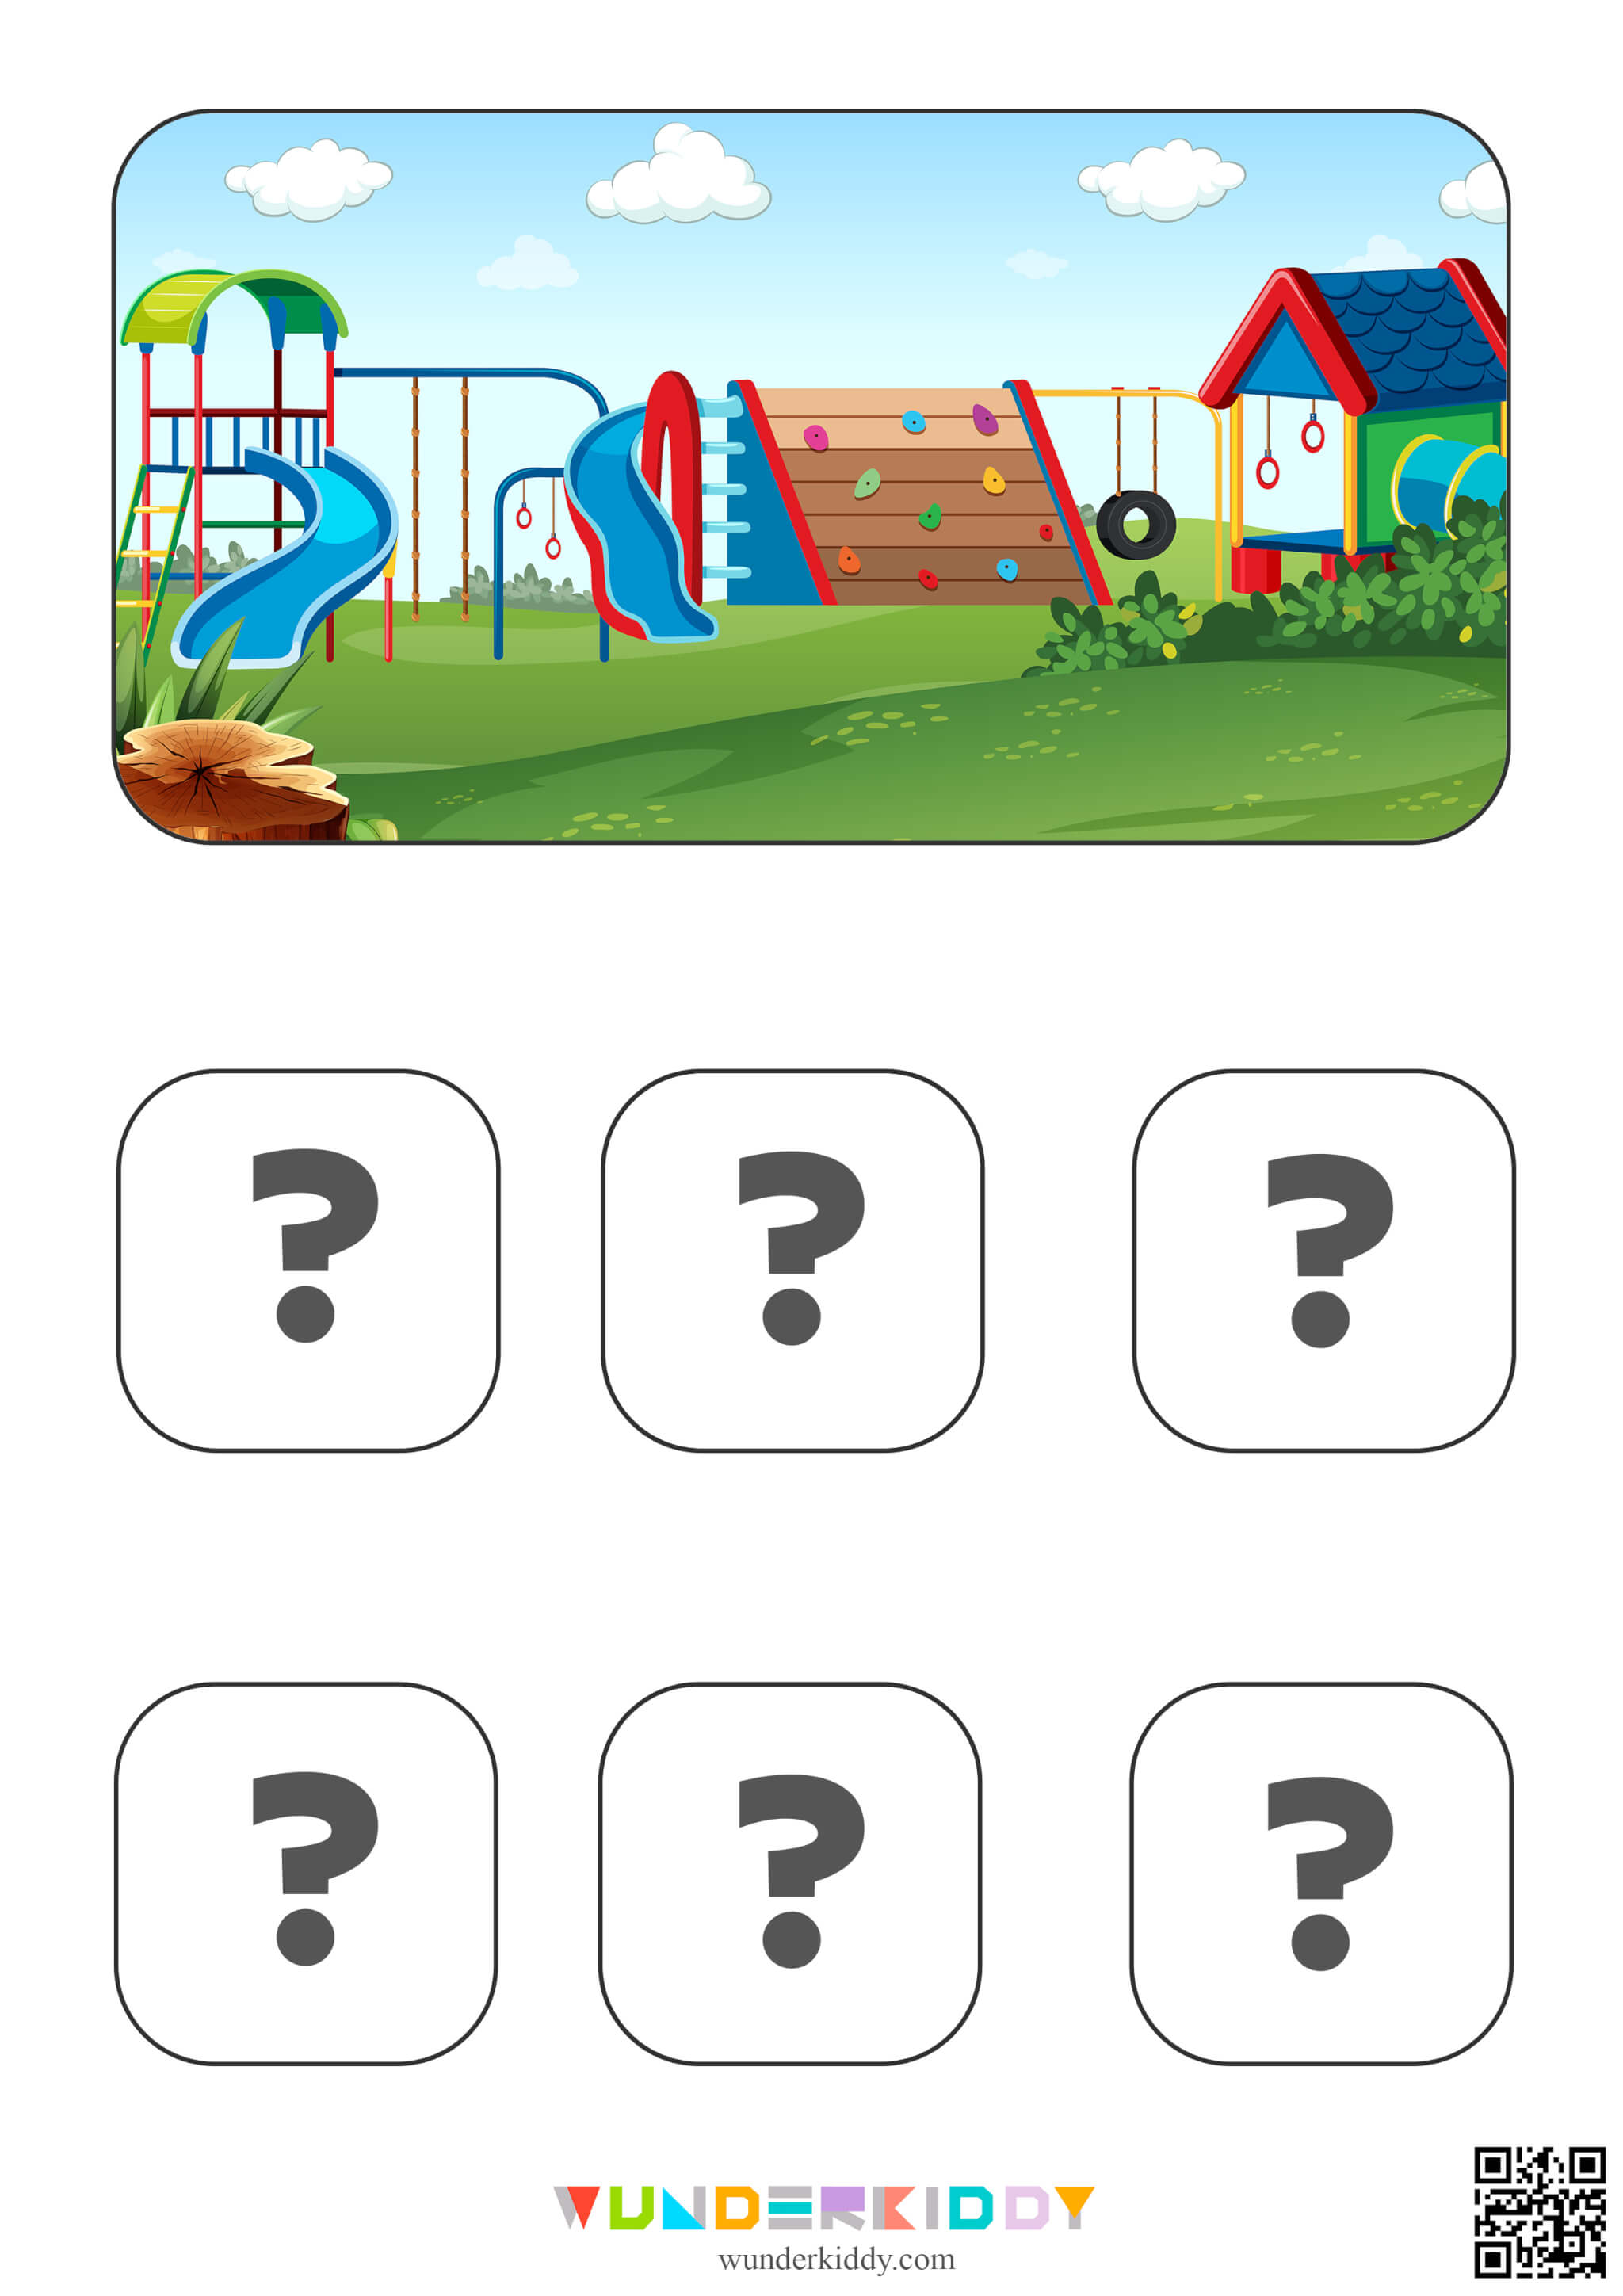 Toys Classification Sorting Game - Image 2